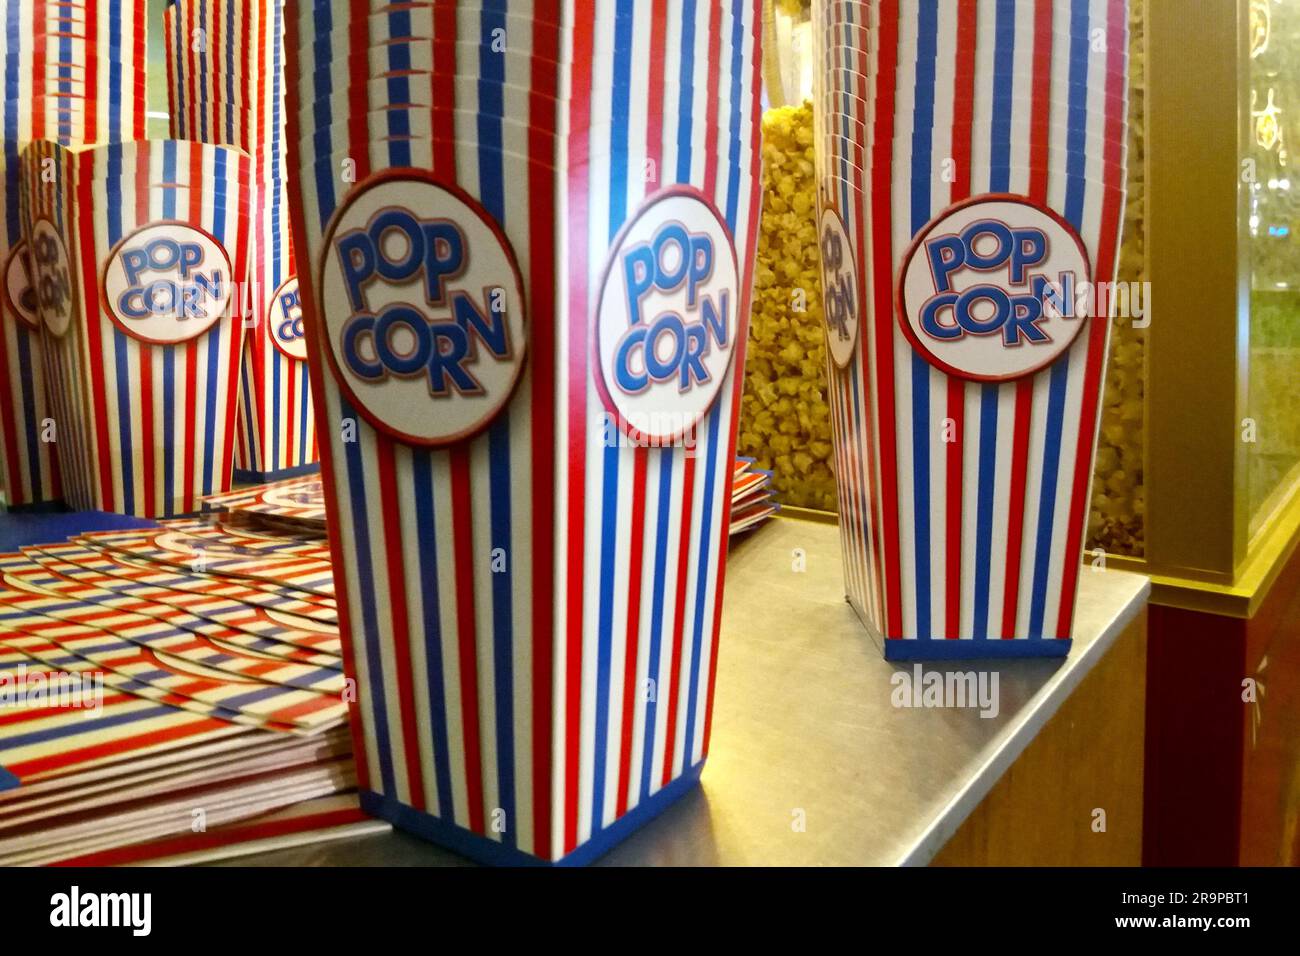 Close-up on a stack empty popcorn boxes before a popcorn maker. Stock Photo